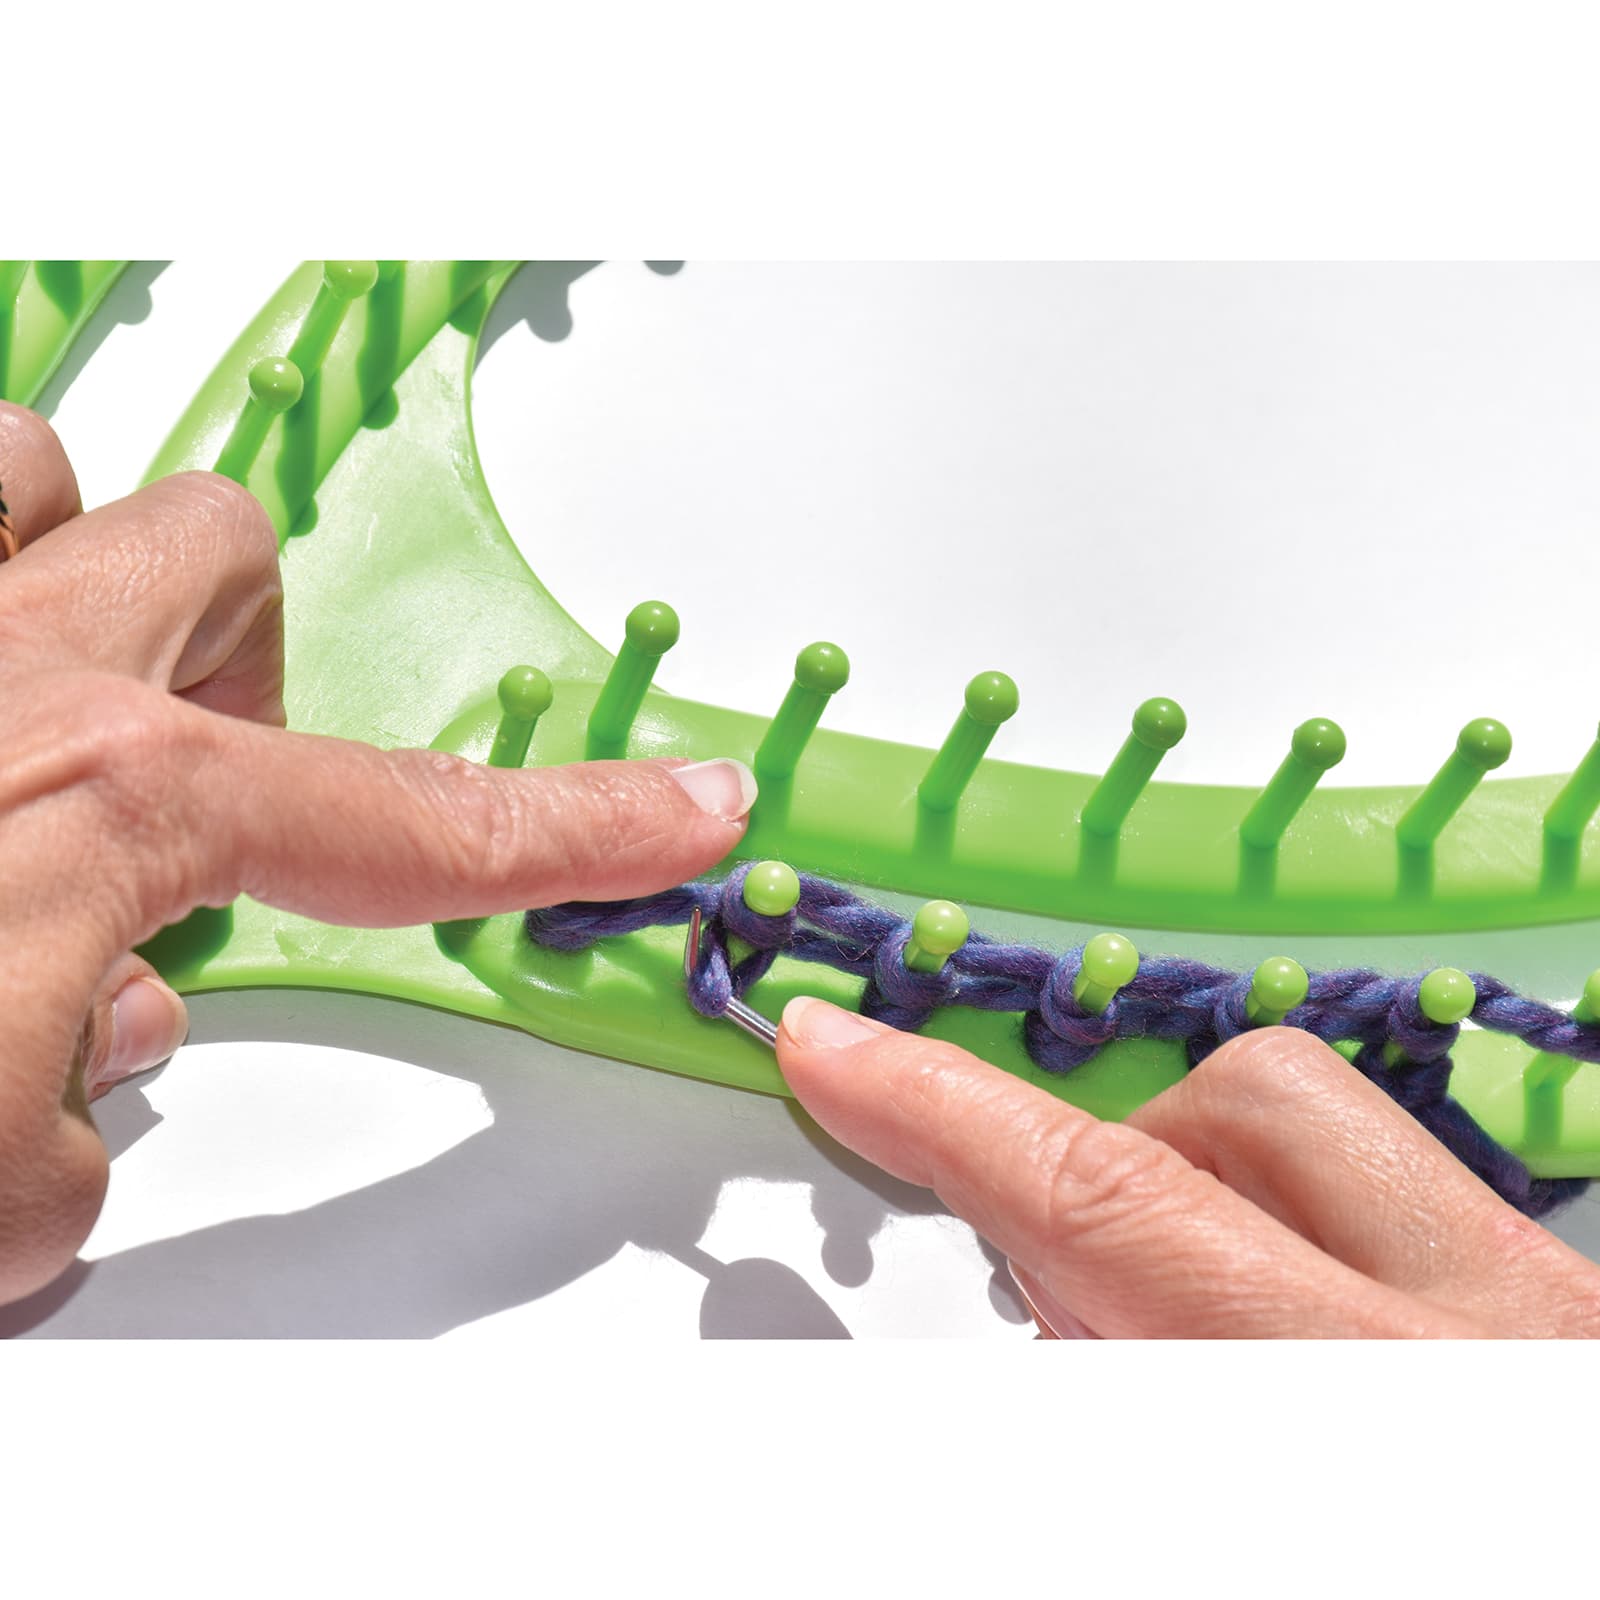 Knit Quick Infinity Loom by Loops & Threads in Lime Green | 25.6 x 8.2 x 1.2 | Michaels